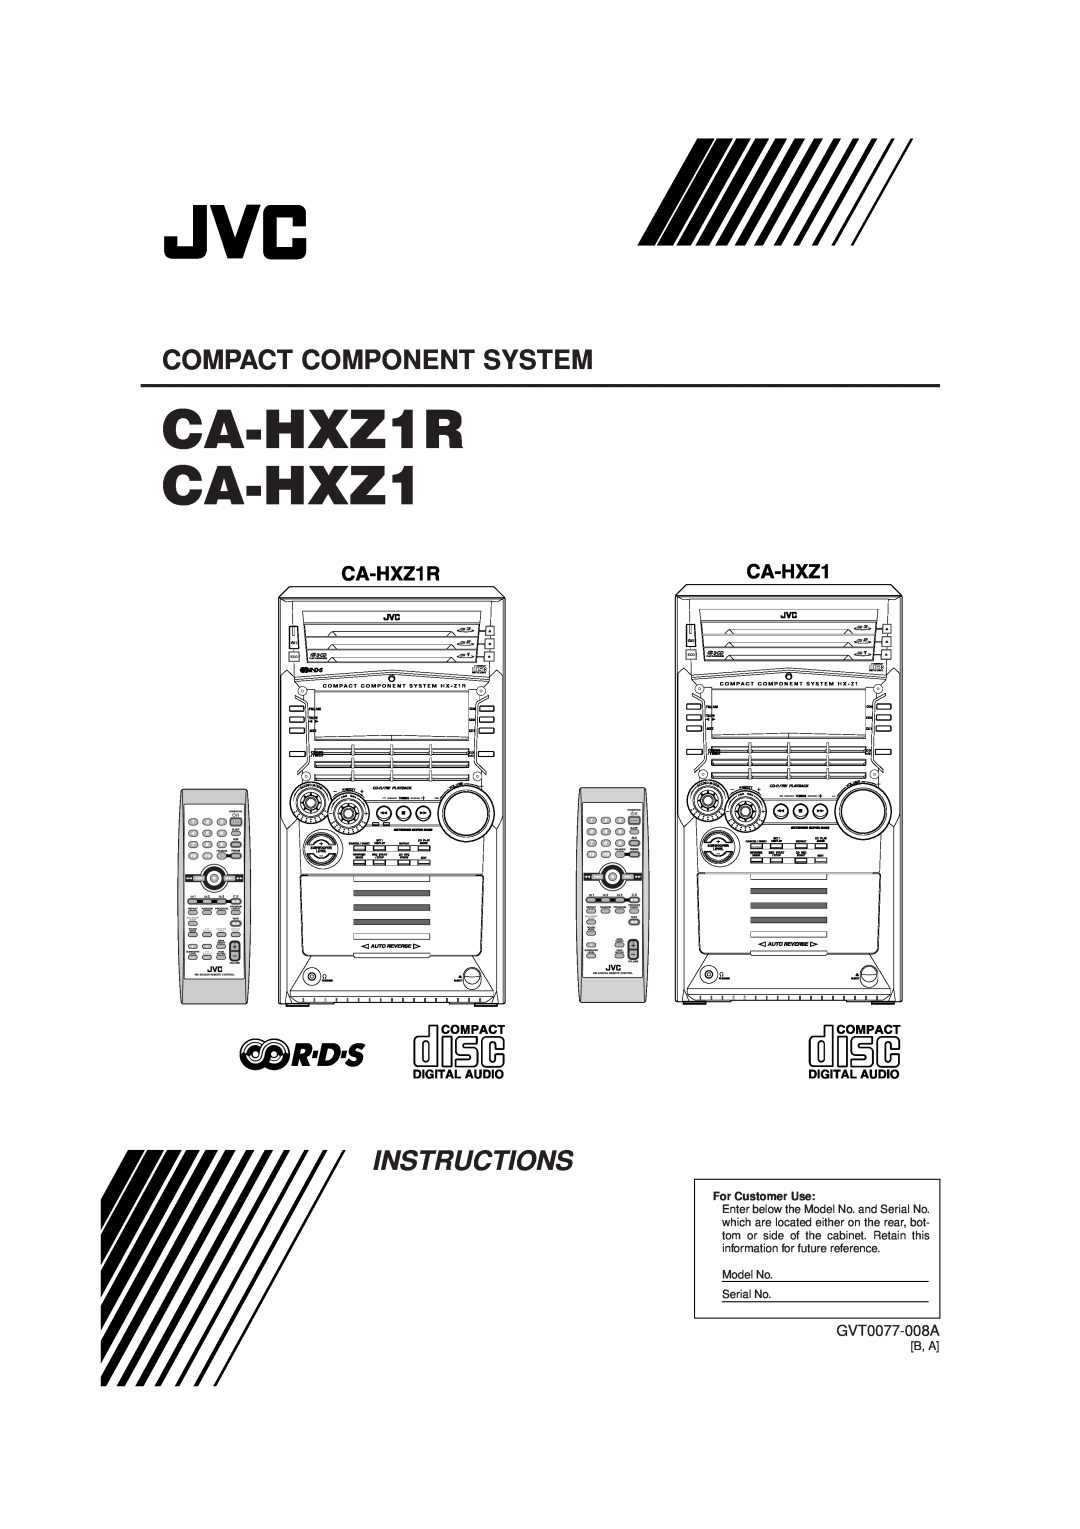 JVC manual CA-HXZ1R CA-HXZ1, Compact Component System, Instructions, For Customer Use, Nd M, Olume, Preset, Eset 